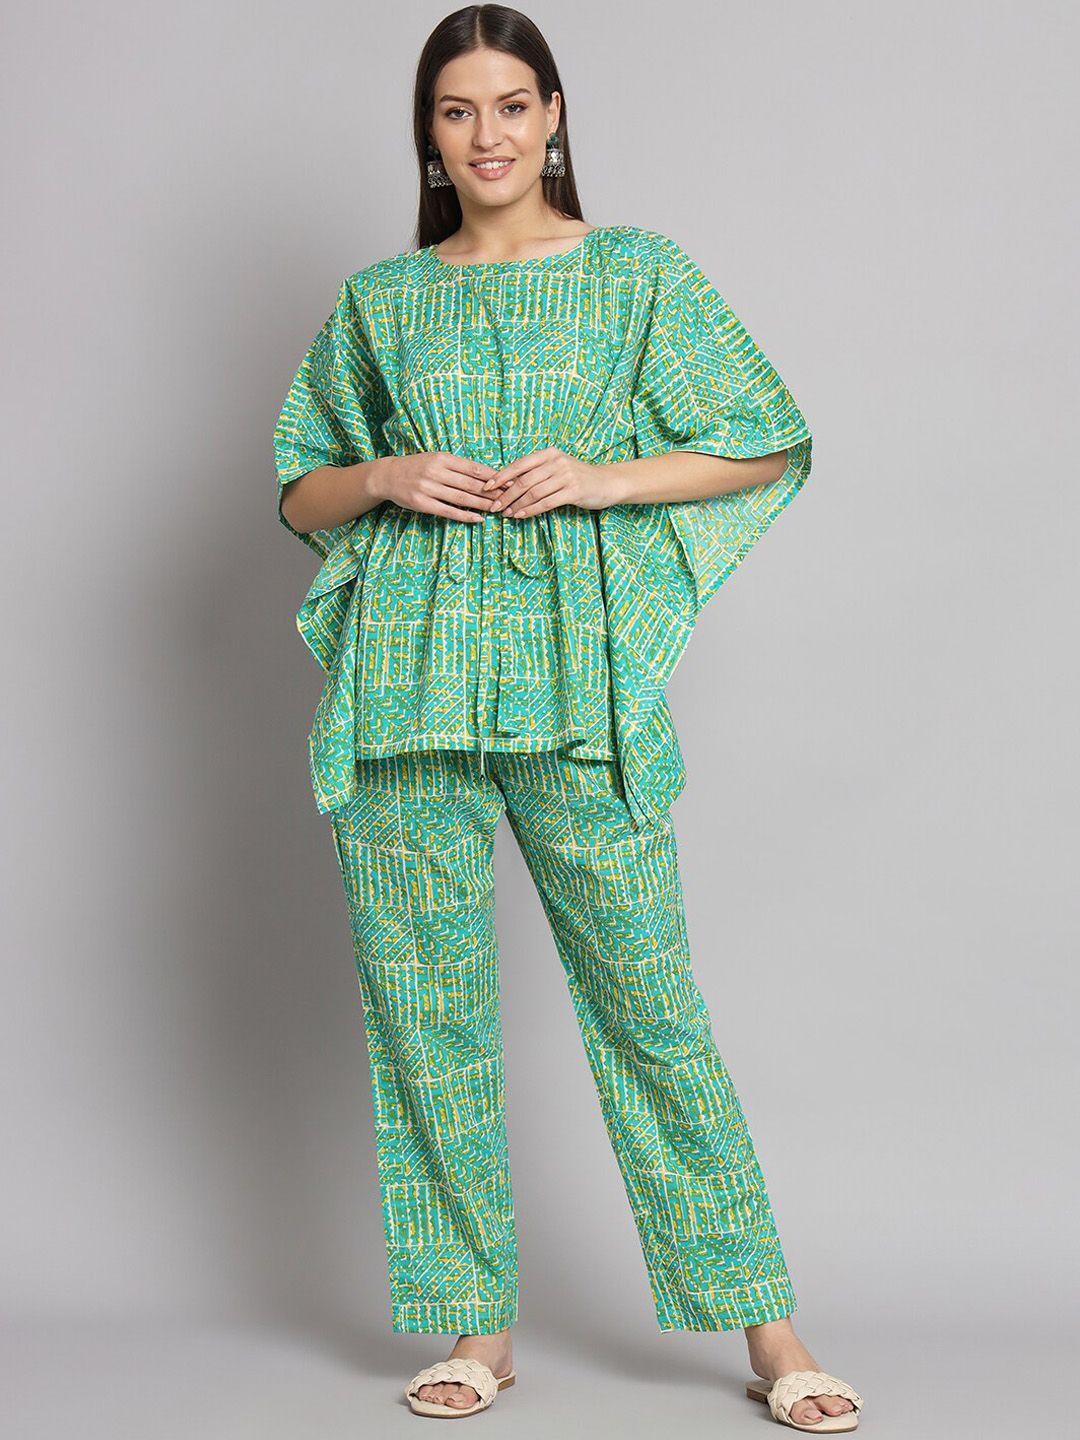 kalini ethnic motifs printed pure cotton kaftan top with trousers